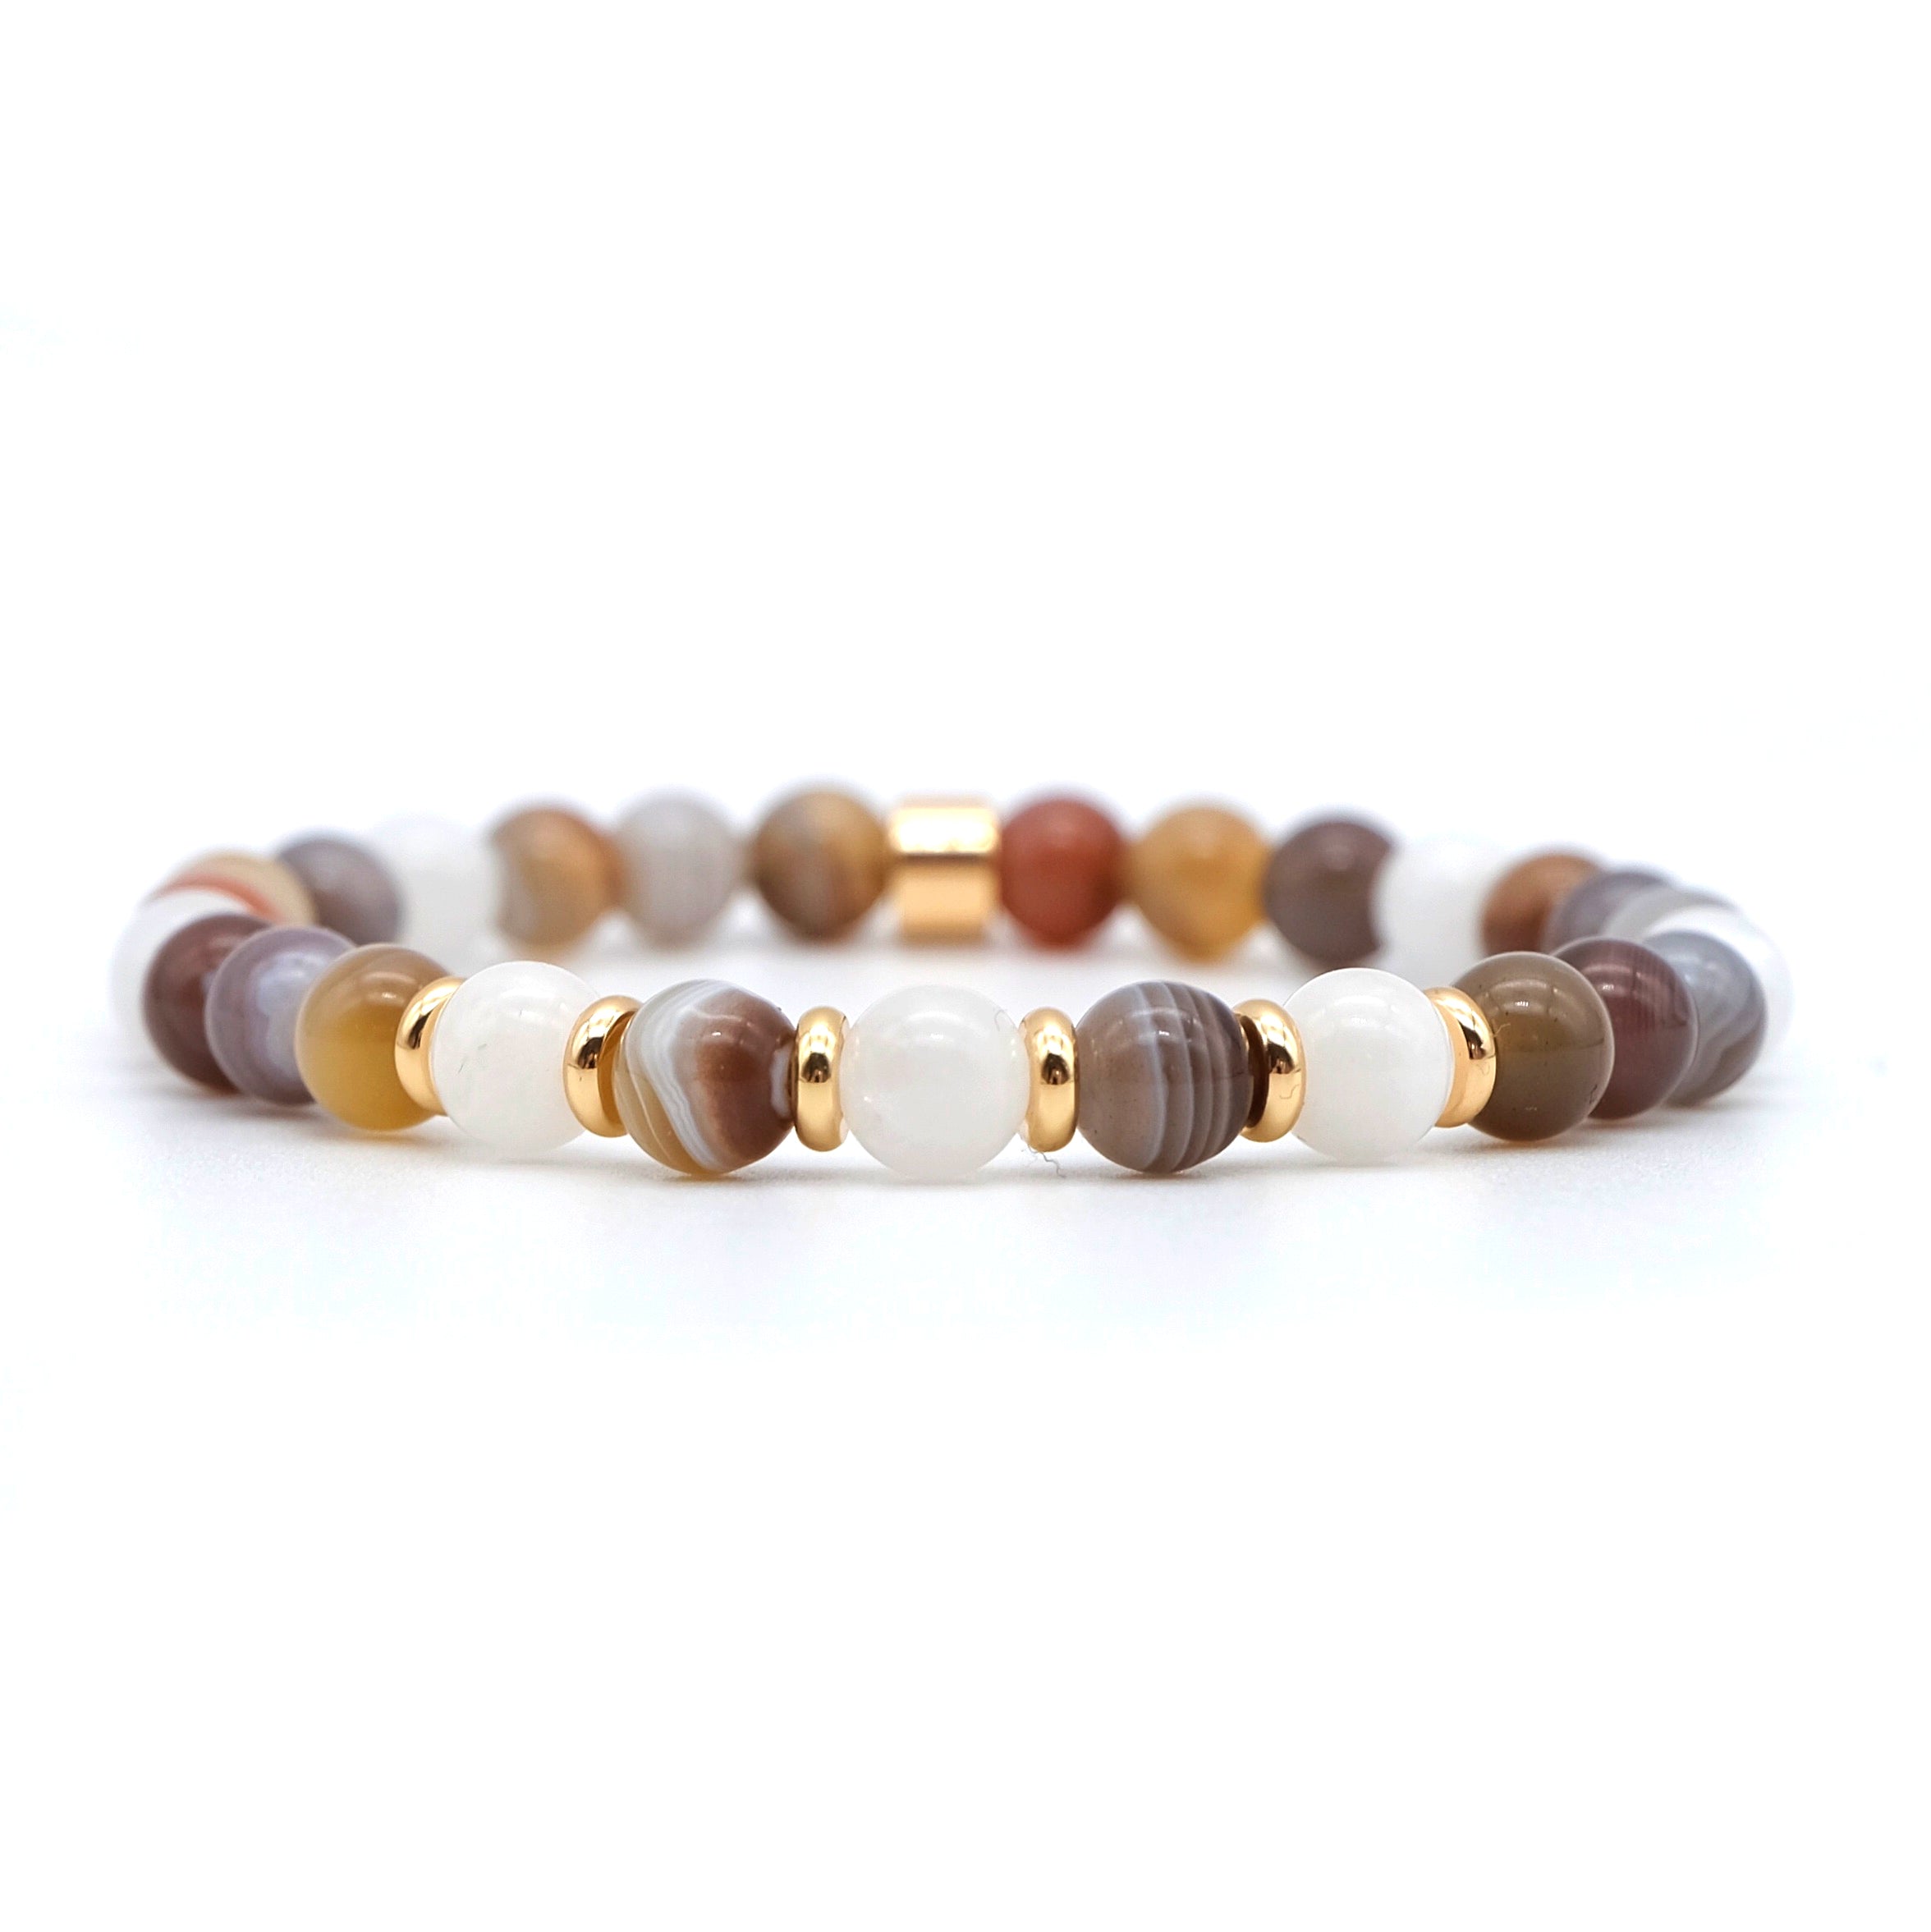 Botswana Agate and Moonstone gemstone bracelet in 6mm beads with gold accessories